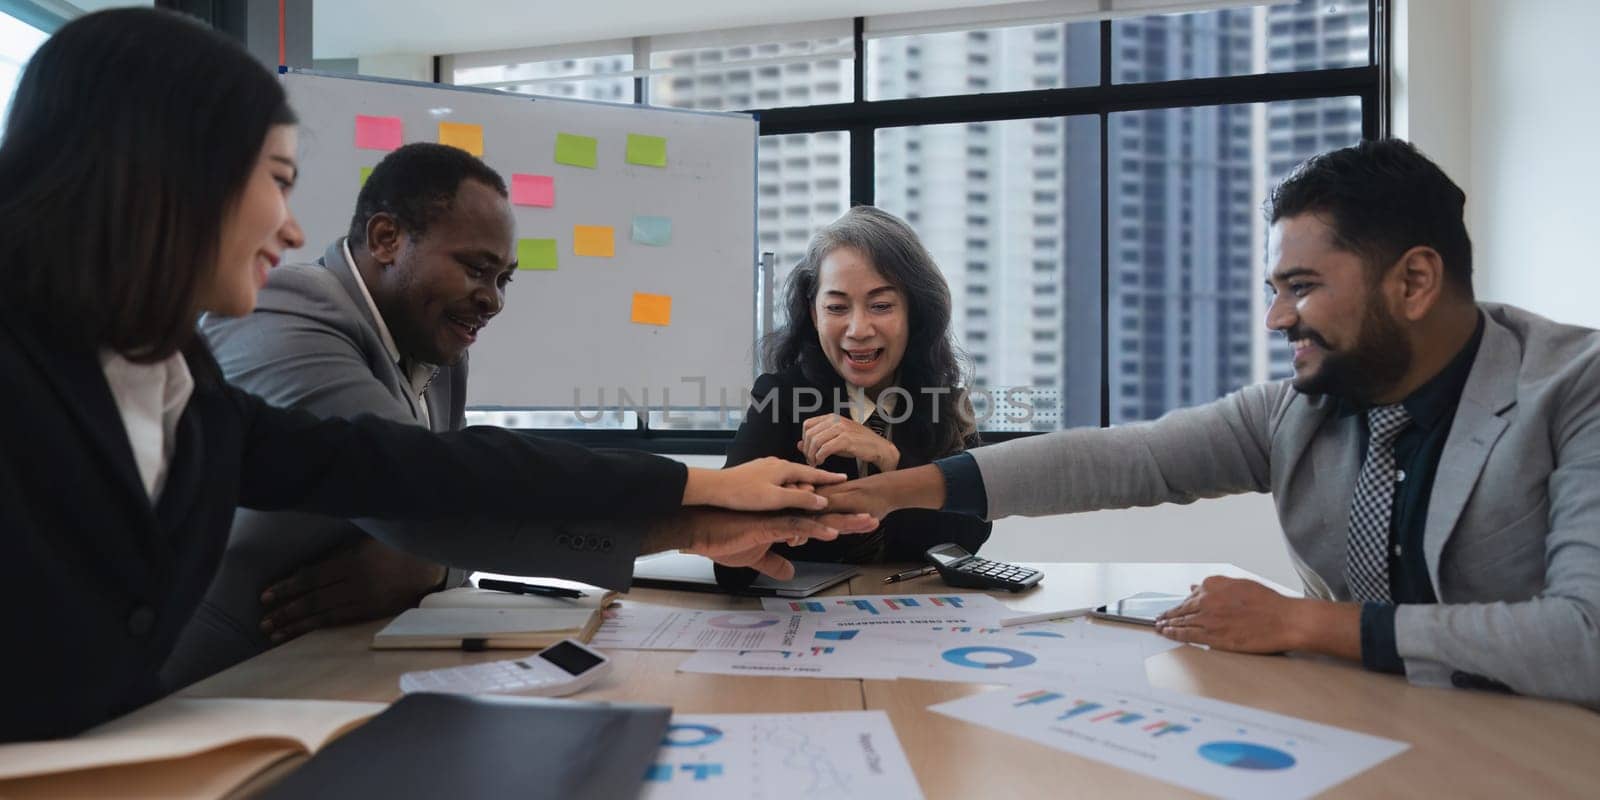 Business people diversity ethnicity stack touch arms palms together celebrating promotion reward, succeed common aim. Give high five symbol of unity.